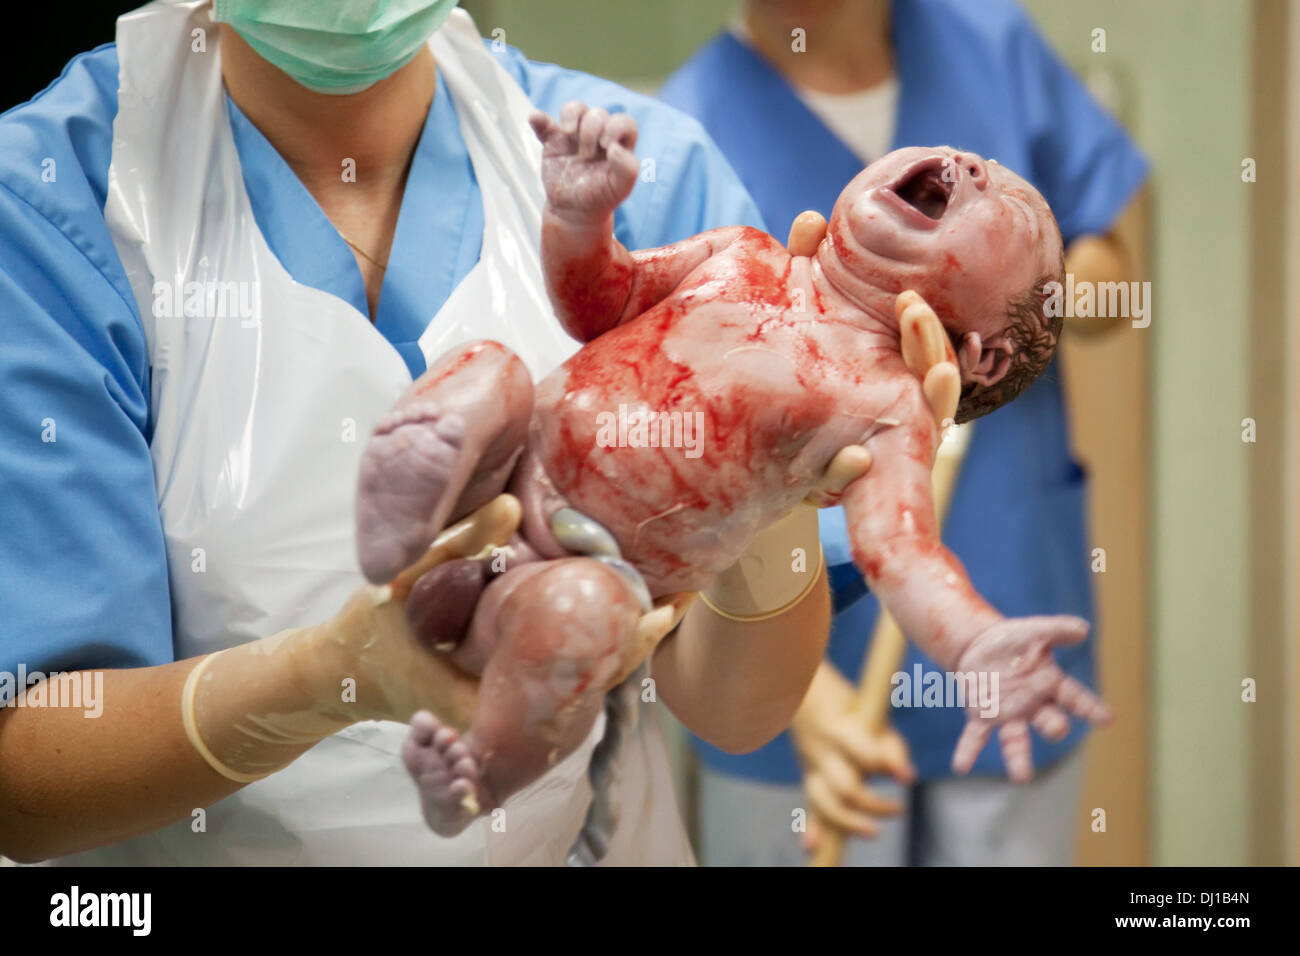 New born baby in doctor's hands Stock Photo